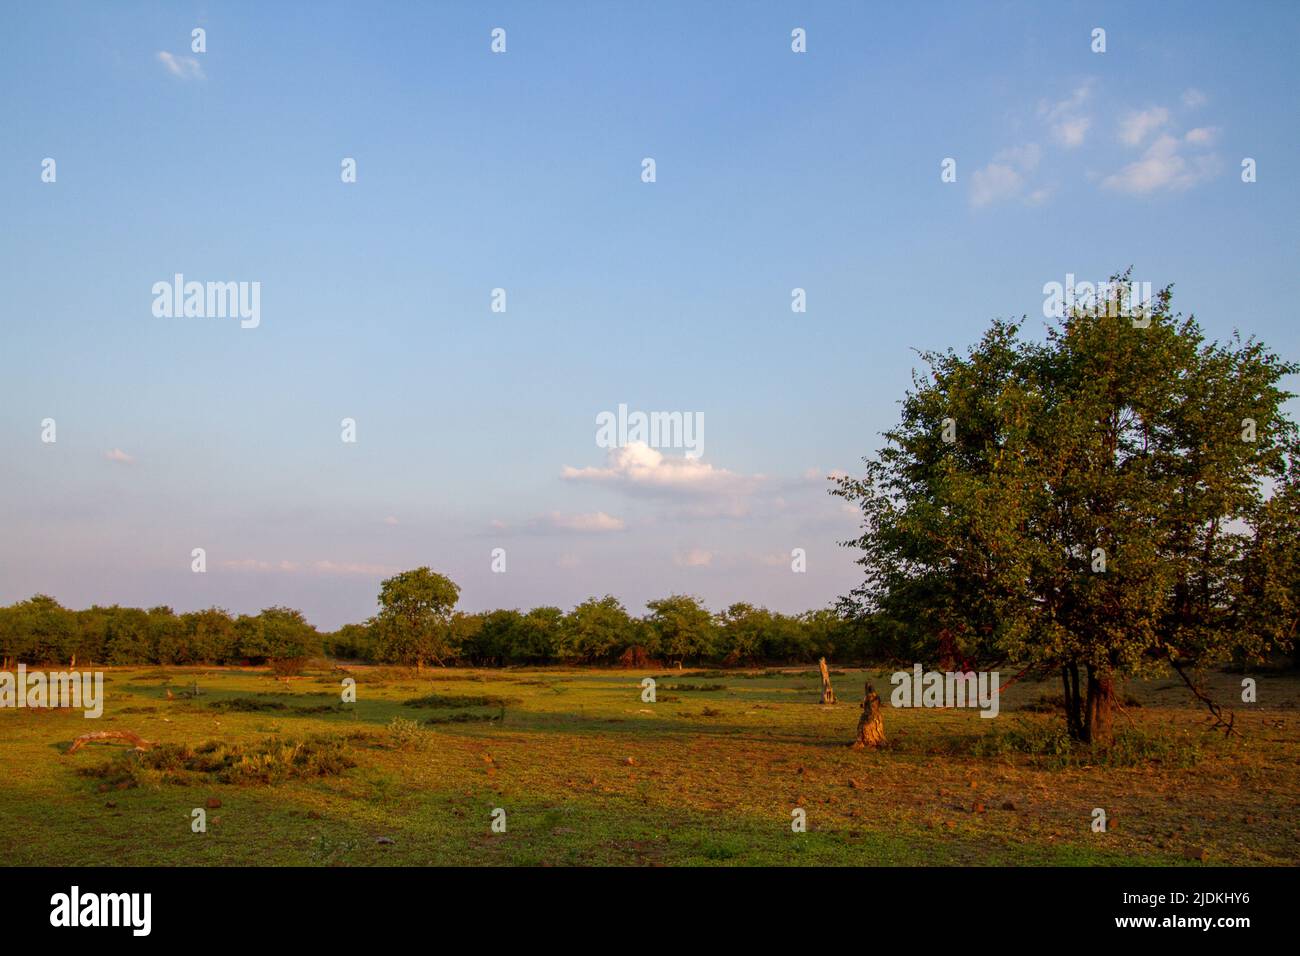 Wilderness landscape in the Kruger Park in South Africa Stock Photo